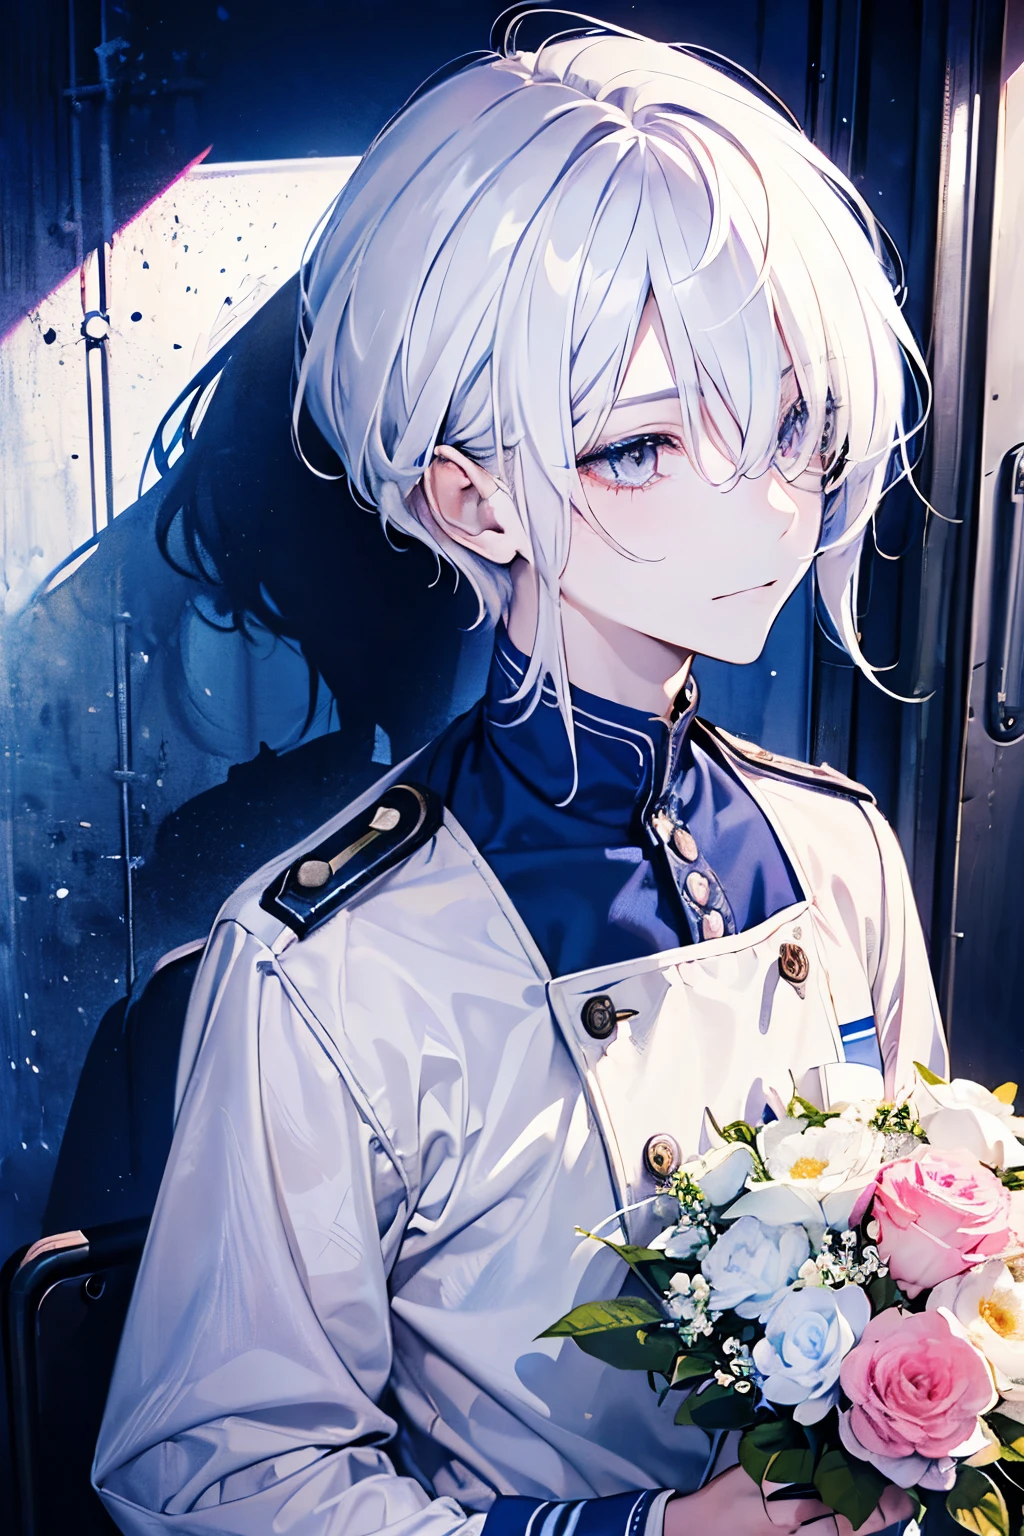 ((17years old man:1.2)),((male:1.5)),masterpiece, best quality,(milky White hair:1.45), (portrait),(shiny NAVY eyes:1.5), white wedding dress,(pop and cute flower pattern background), (perfect hand:1.2),(pink,yellow,purple,white),looking front,((Her bangs are so long that they cover one eye:1.3)),A shy smile,(Looking up:1.2),((train:1.4)),((upper body)),((Top view:1.1)),((Station staff uniform:1.3))